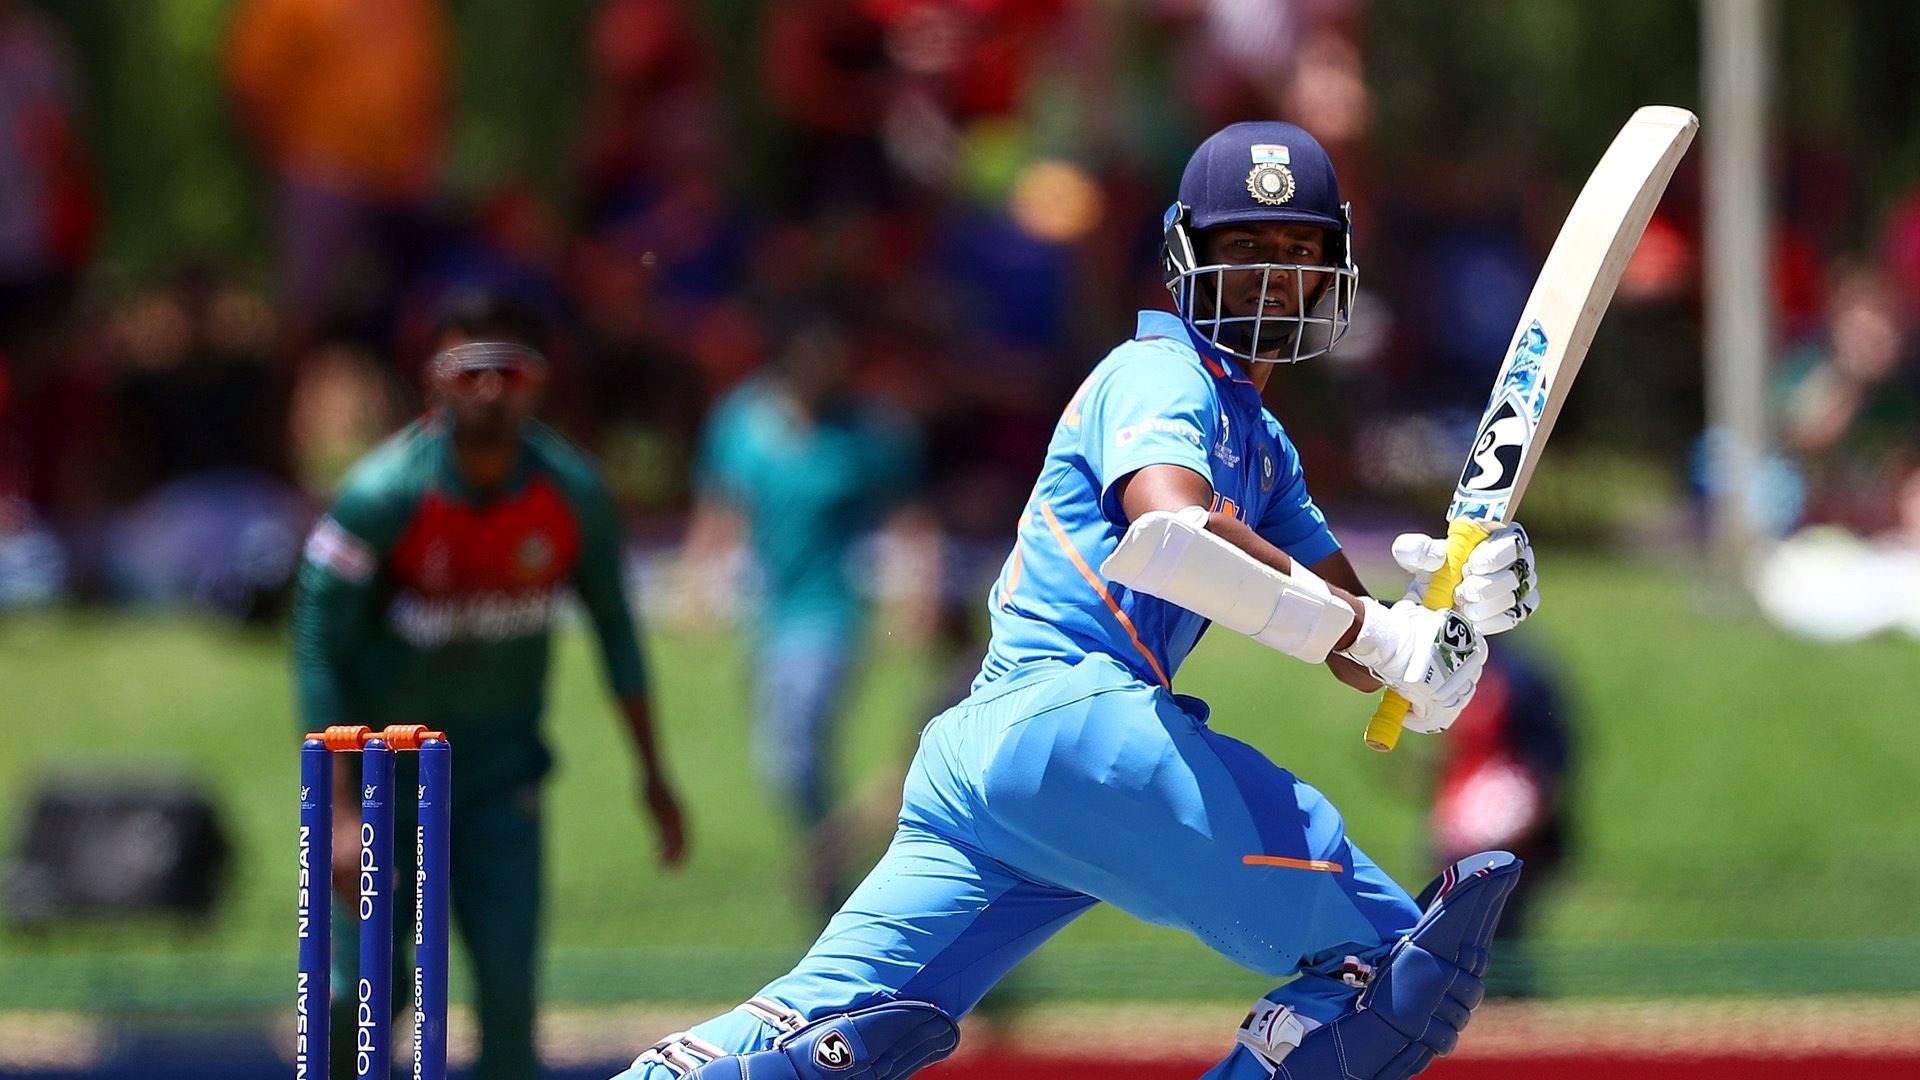 Yashasvi Jaiswal was named Player of the Tournament in the ICC Under-19 World Cup.